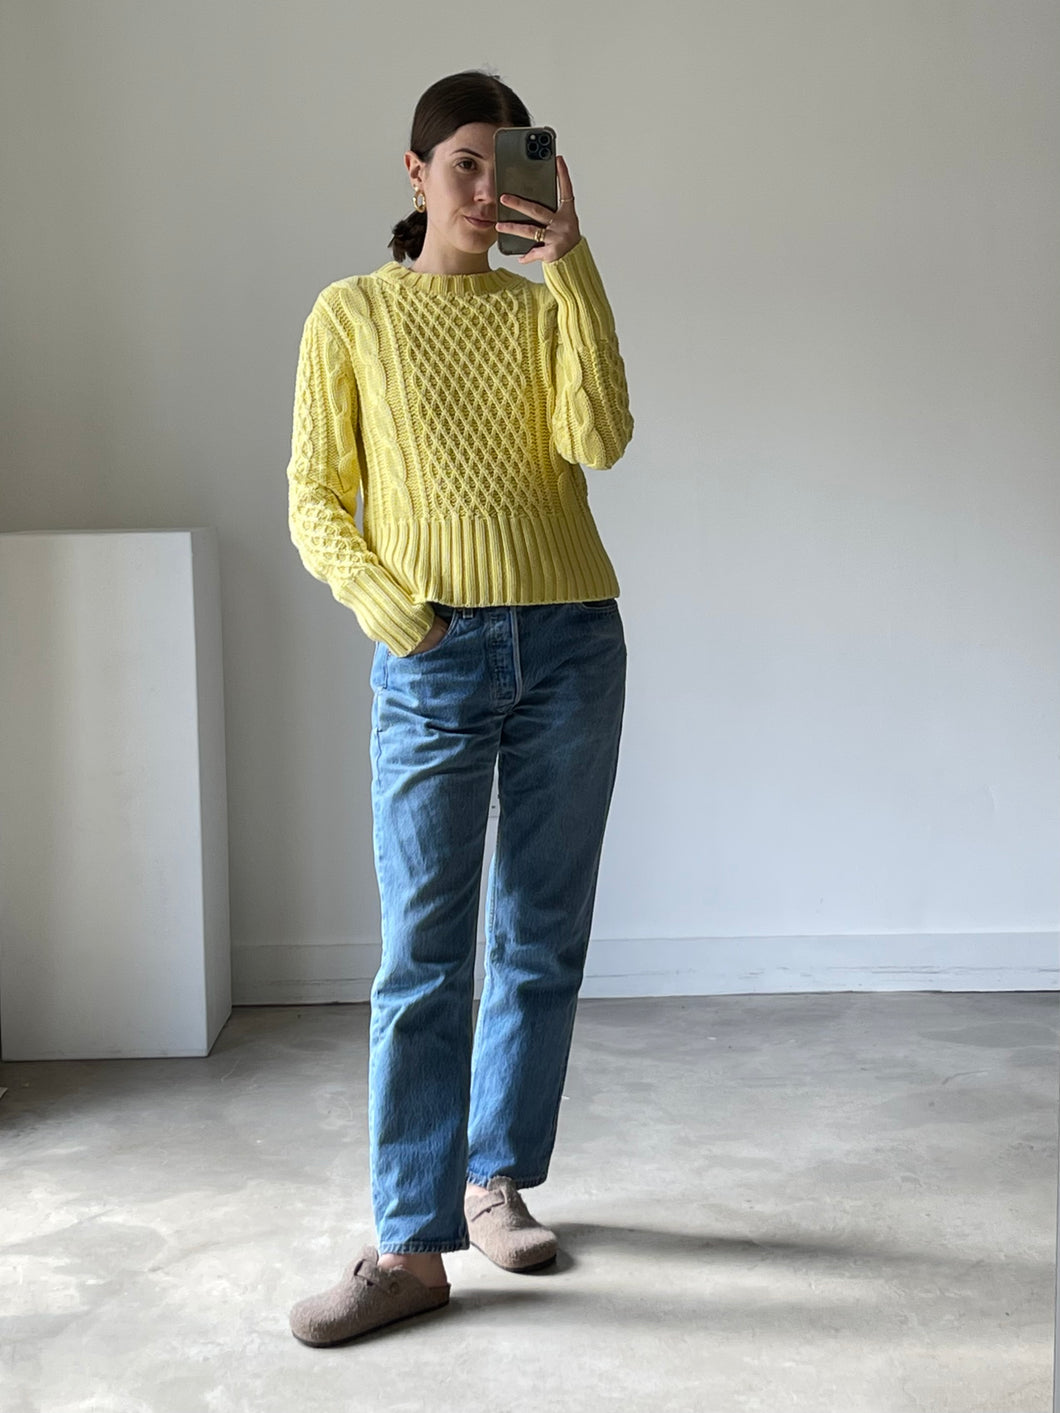 Acne Studios Knitted Jumper